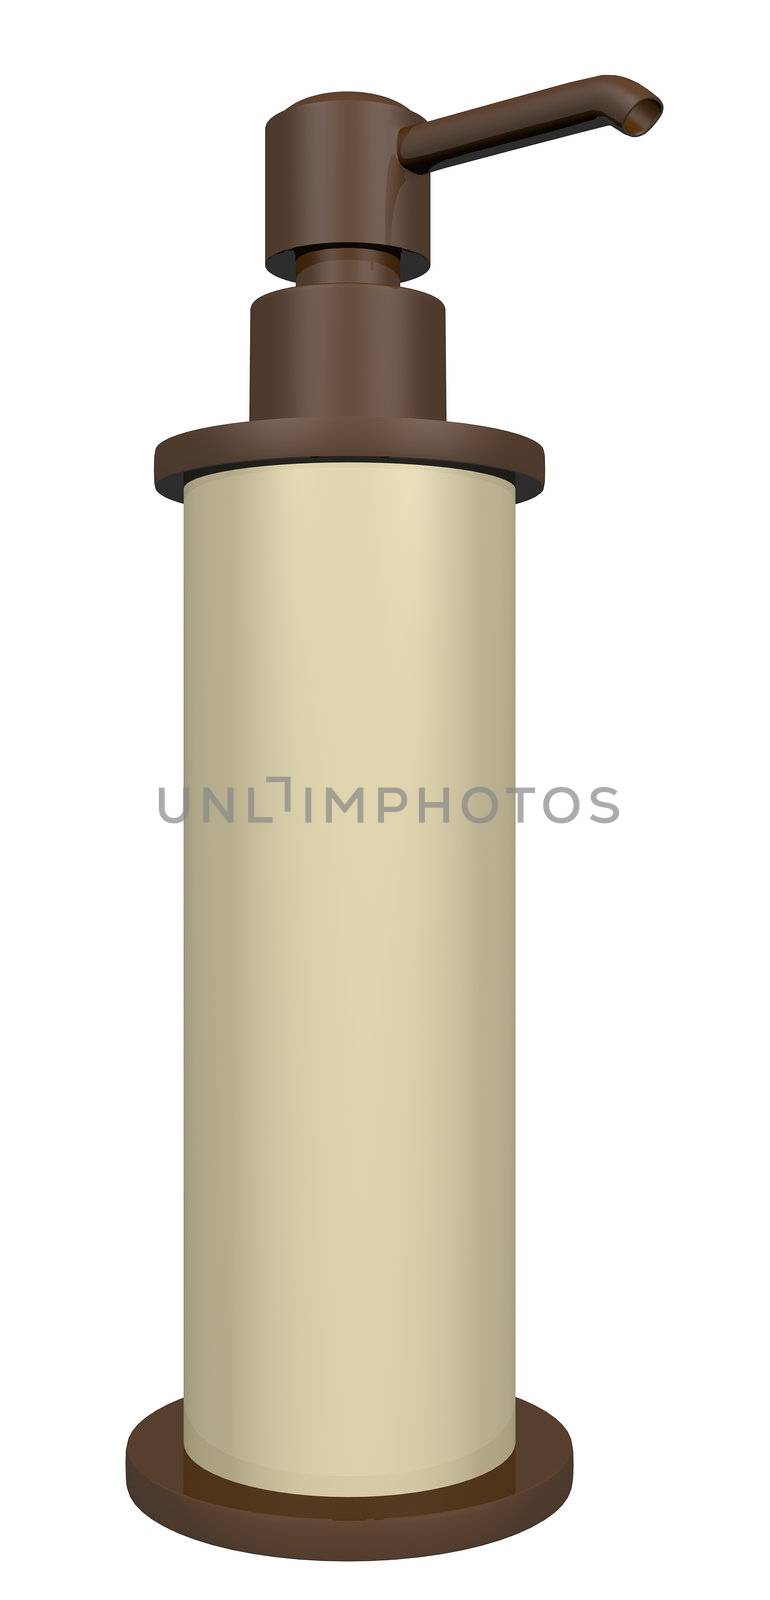 Bronze and cream colored lotion or soap dispenser with a pump by Morphart